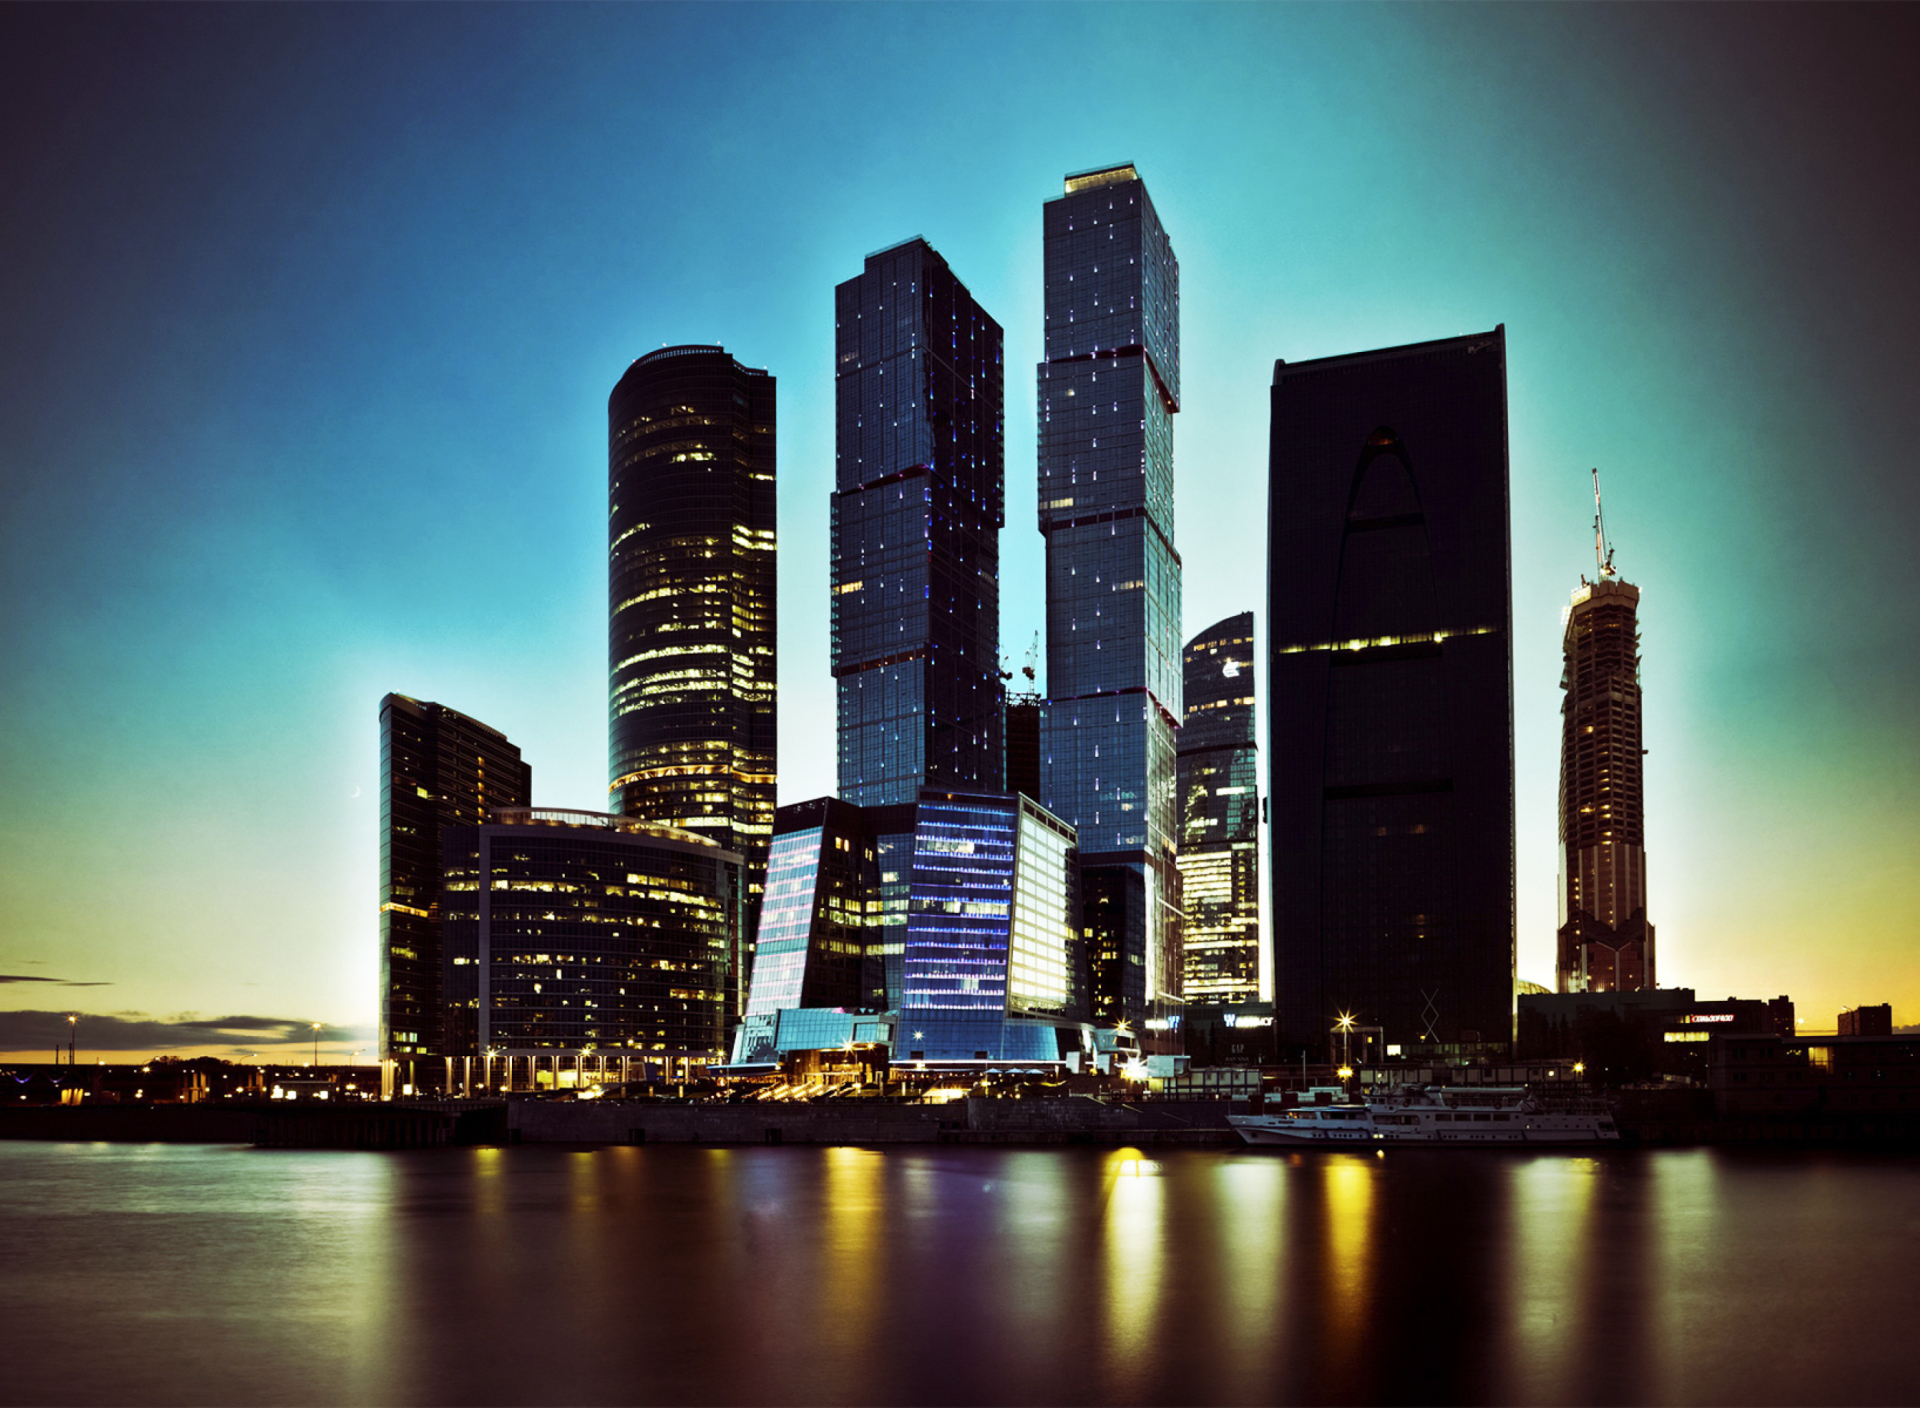 Moscow City Skyscrapers screenshot #1 1920x1408